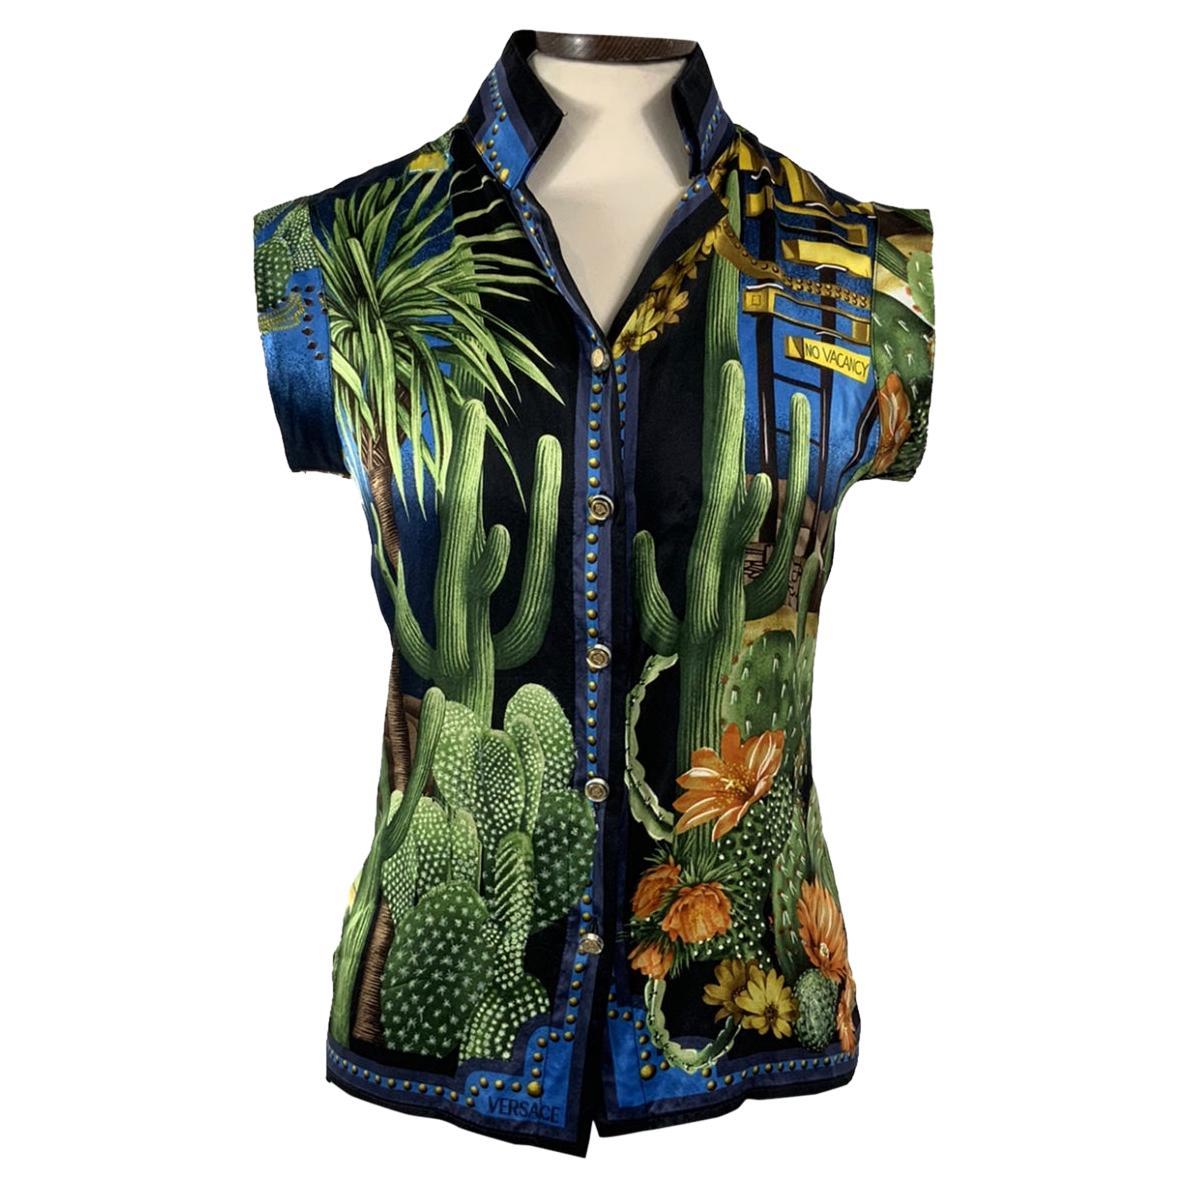 Versace shirt with cactus print. For Sale